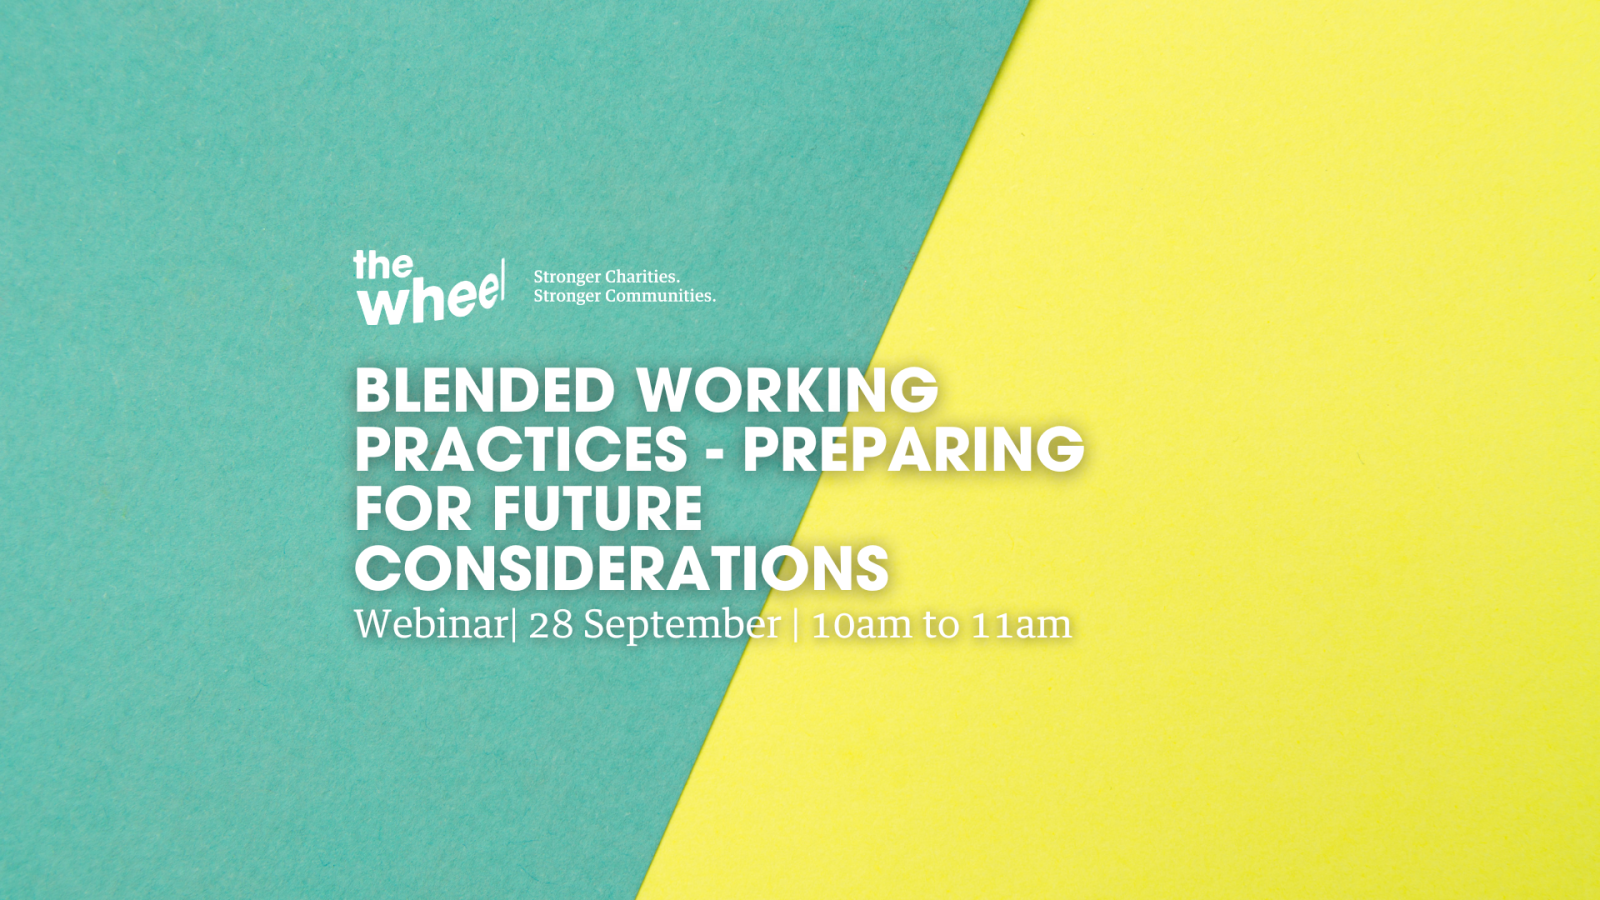 Blended Working Practices - Preparing for Future Considerations (28 Sept 2022)